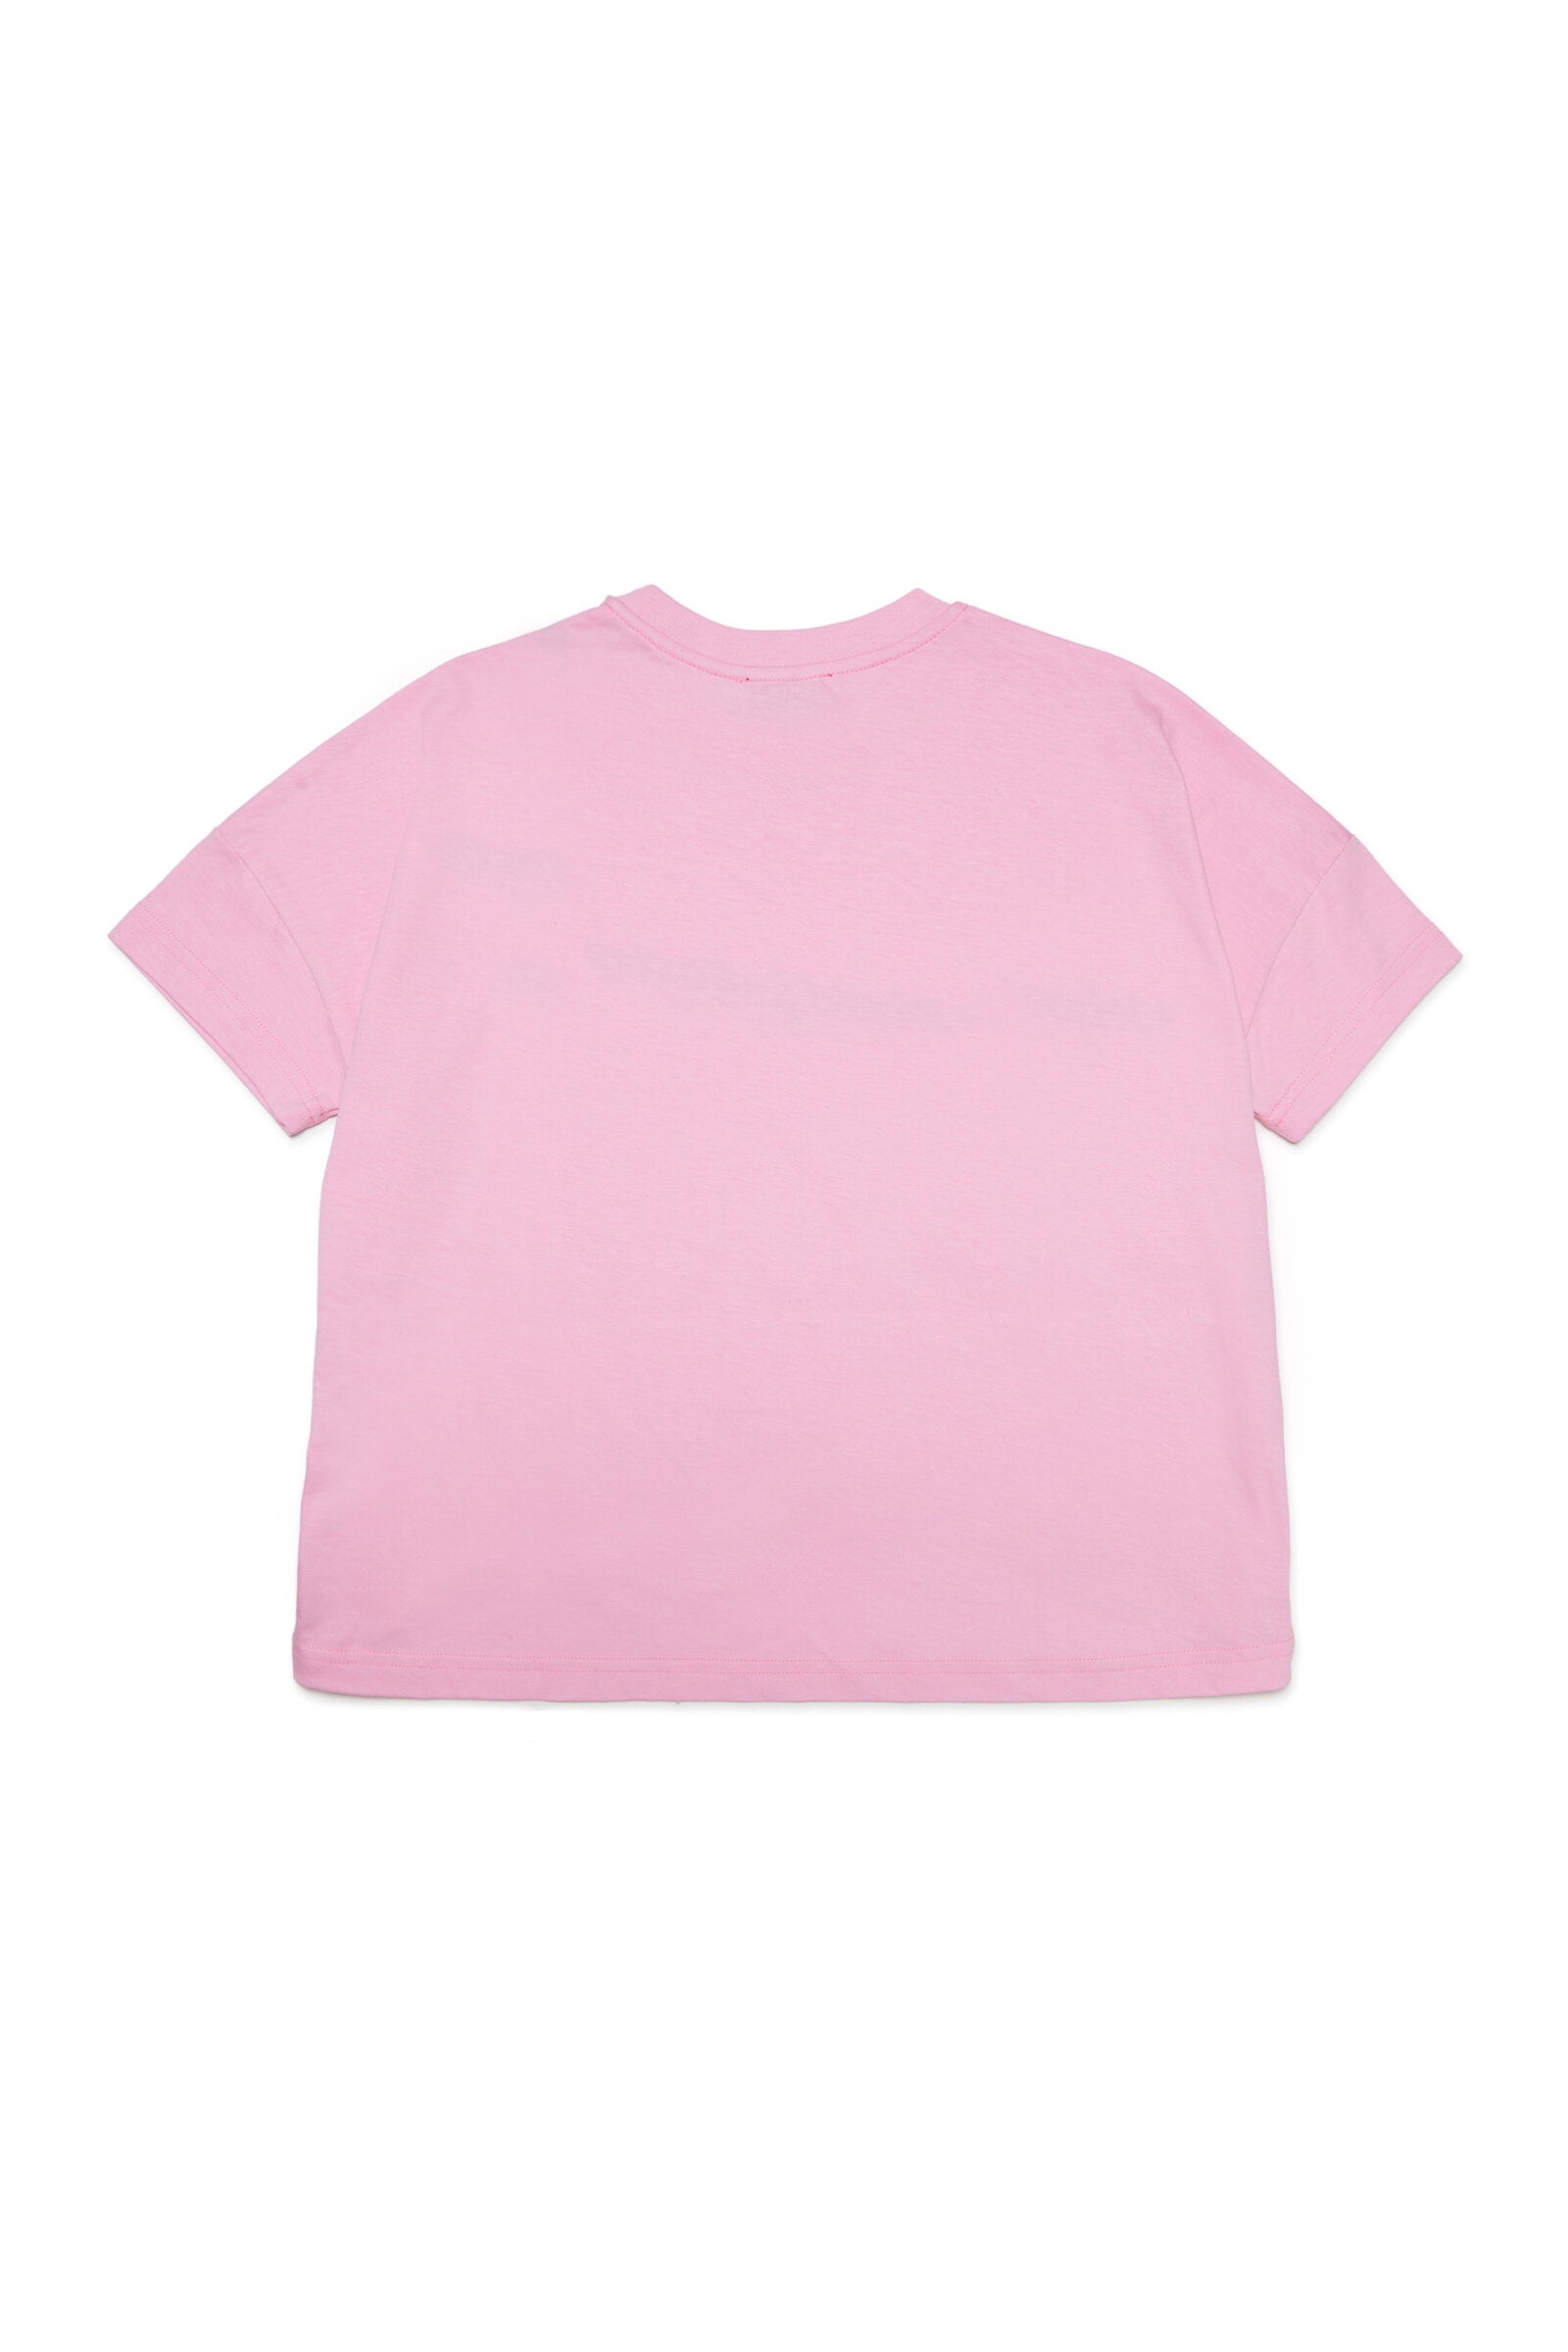 Pastel pink cropped T-shirt in jersey with Diesel Industry logo